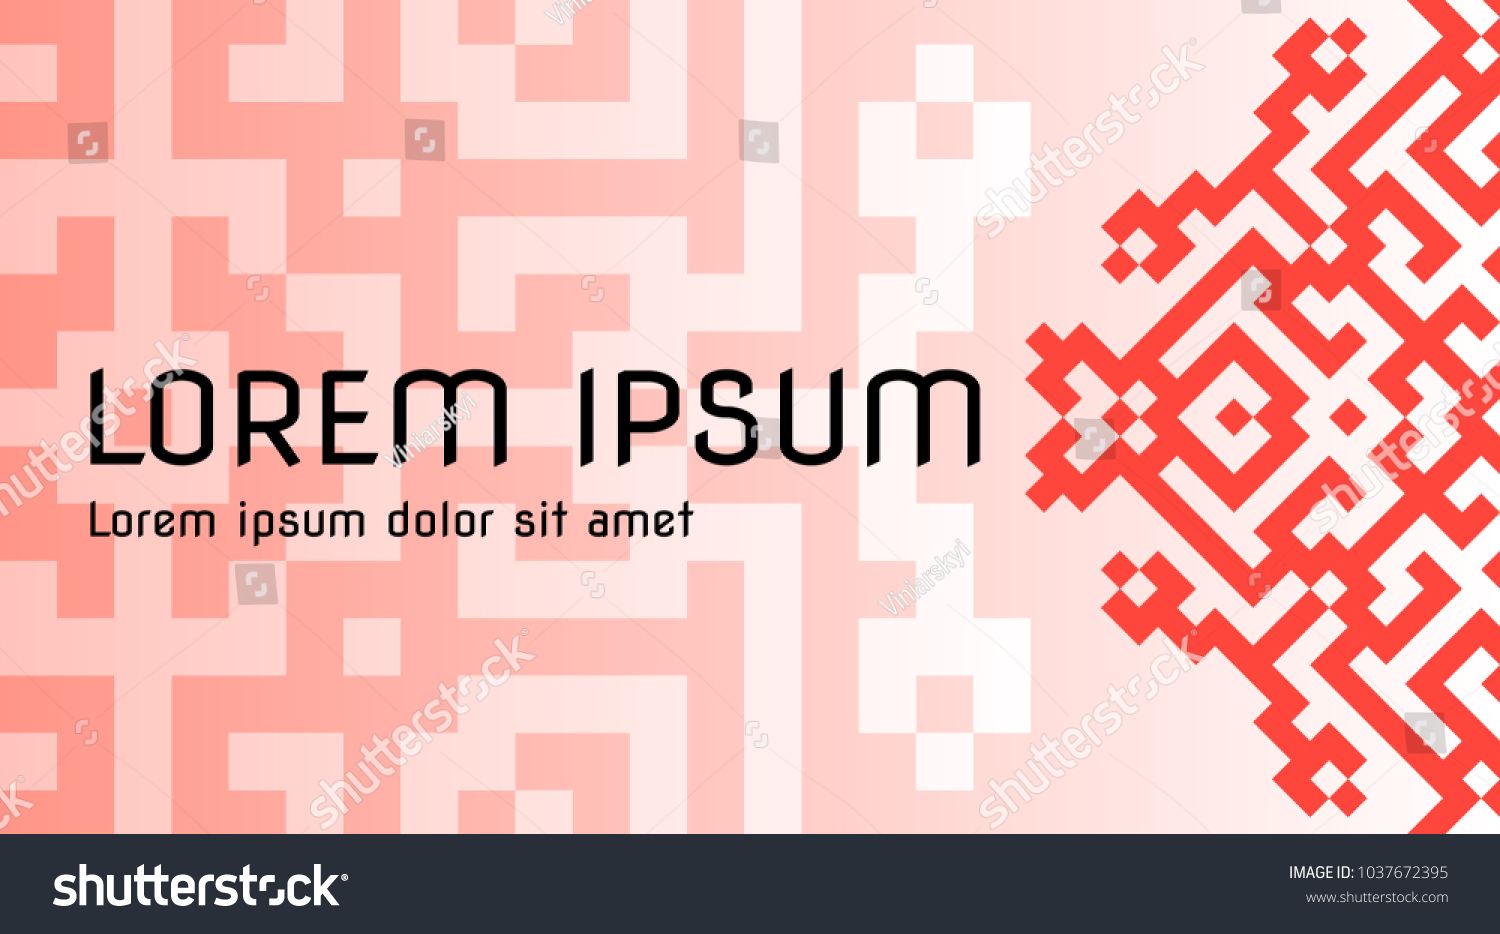 SVG of vector background for business cards, invitations and presentations. diamond-shaped ukrainian ornament on the gradient background. svg